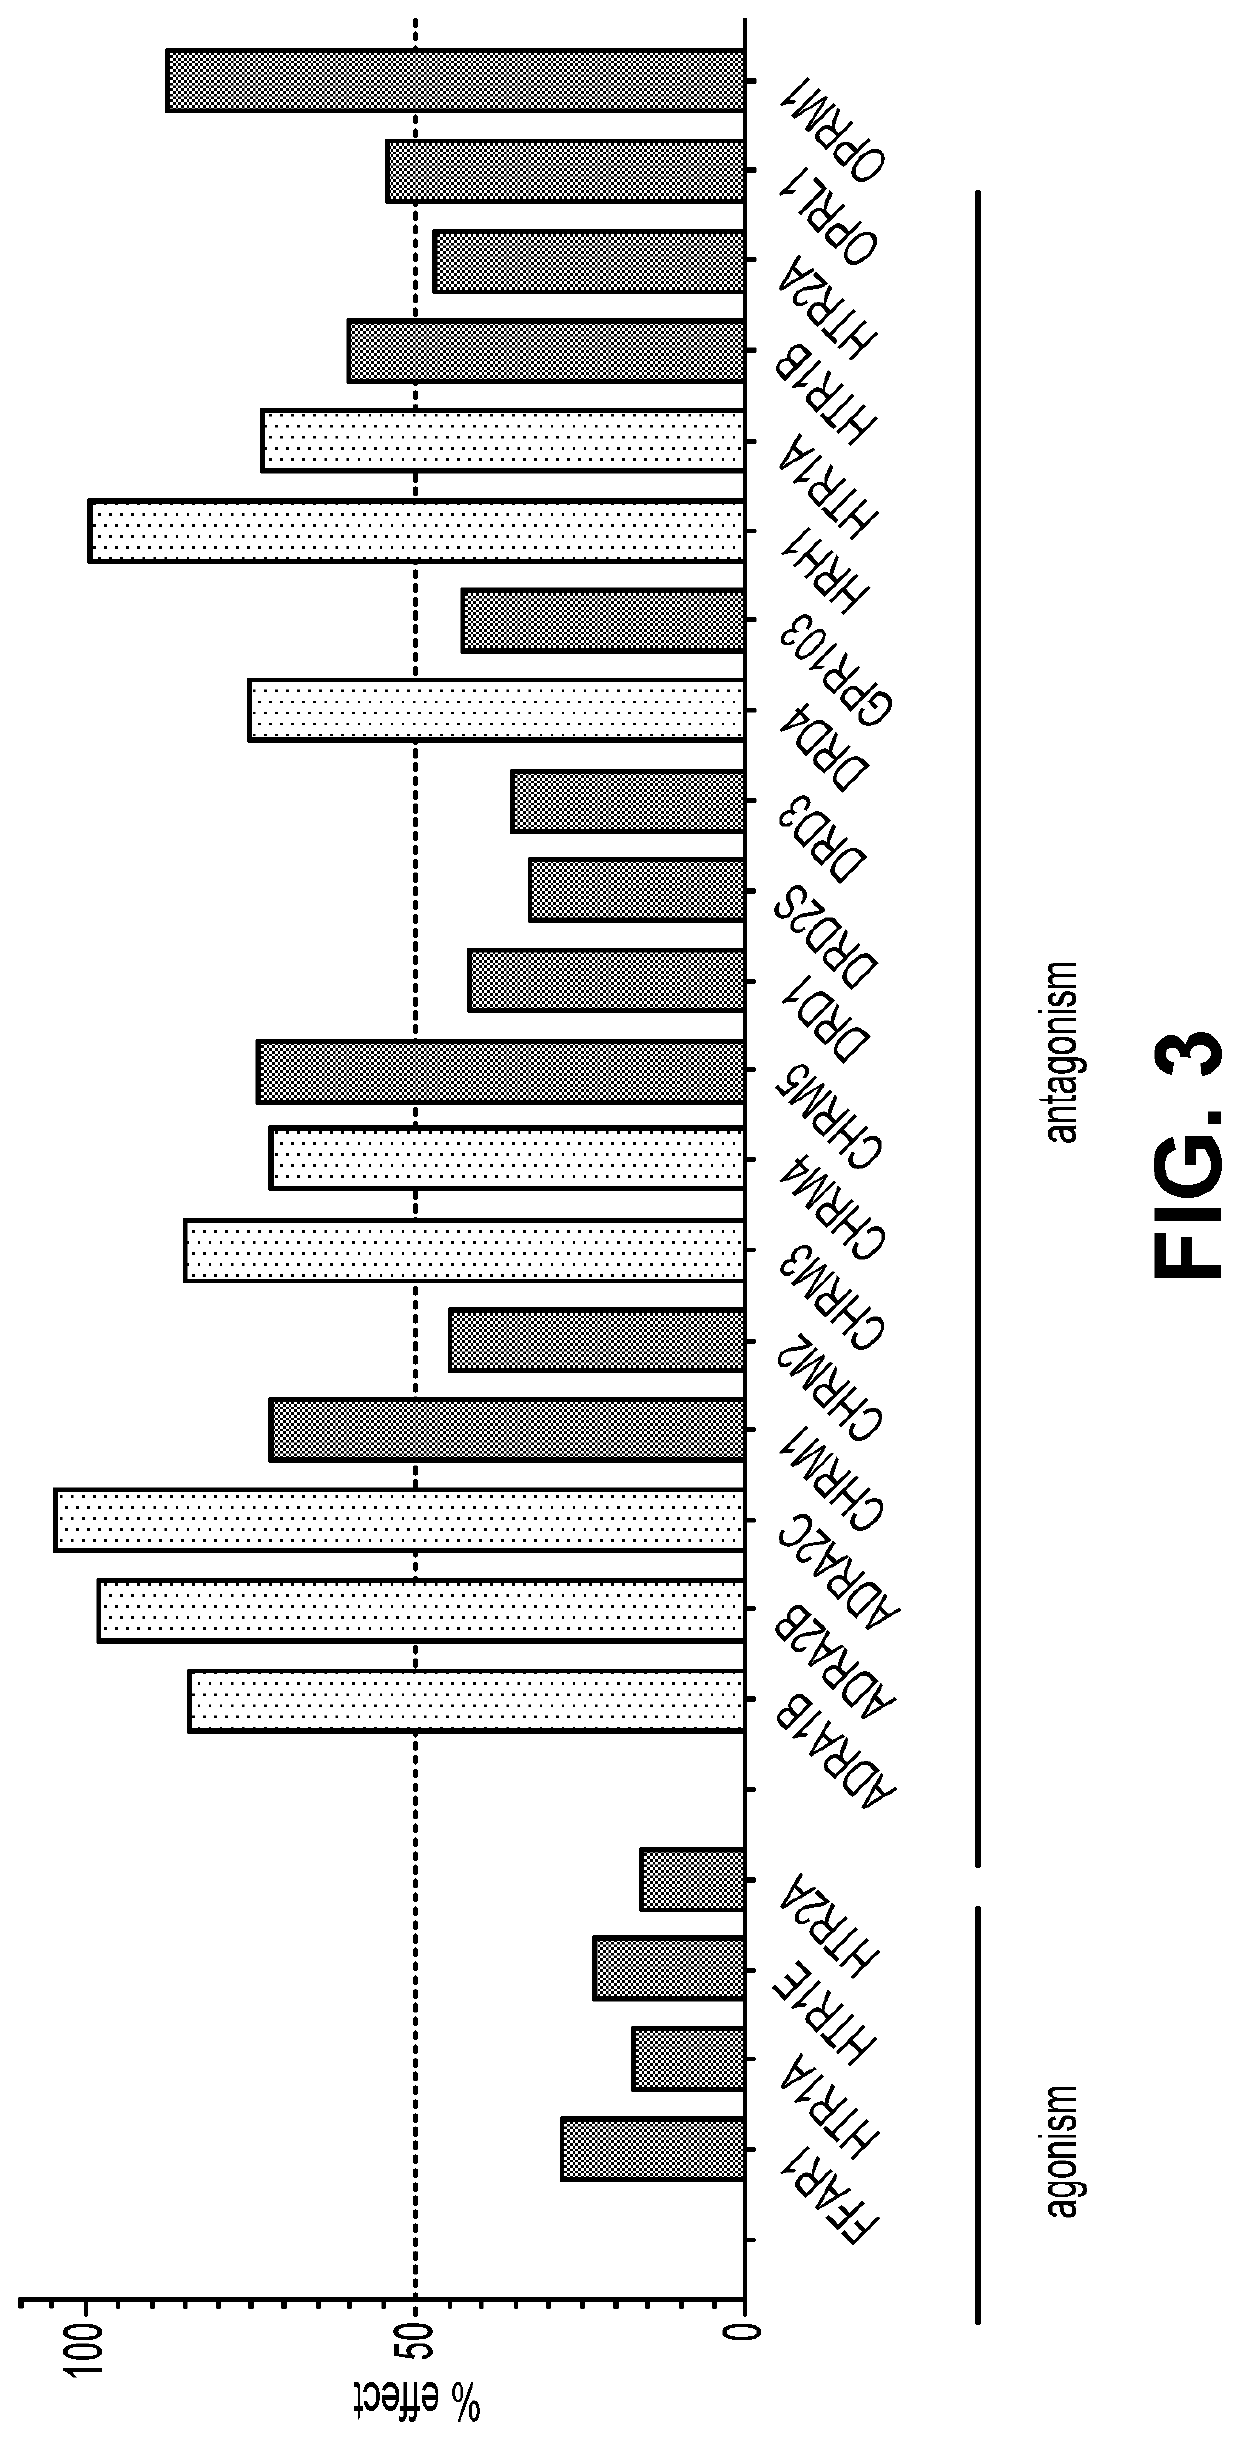 Opioid antagonist compounds and methods of treating medical conditions